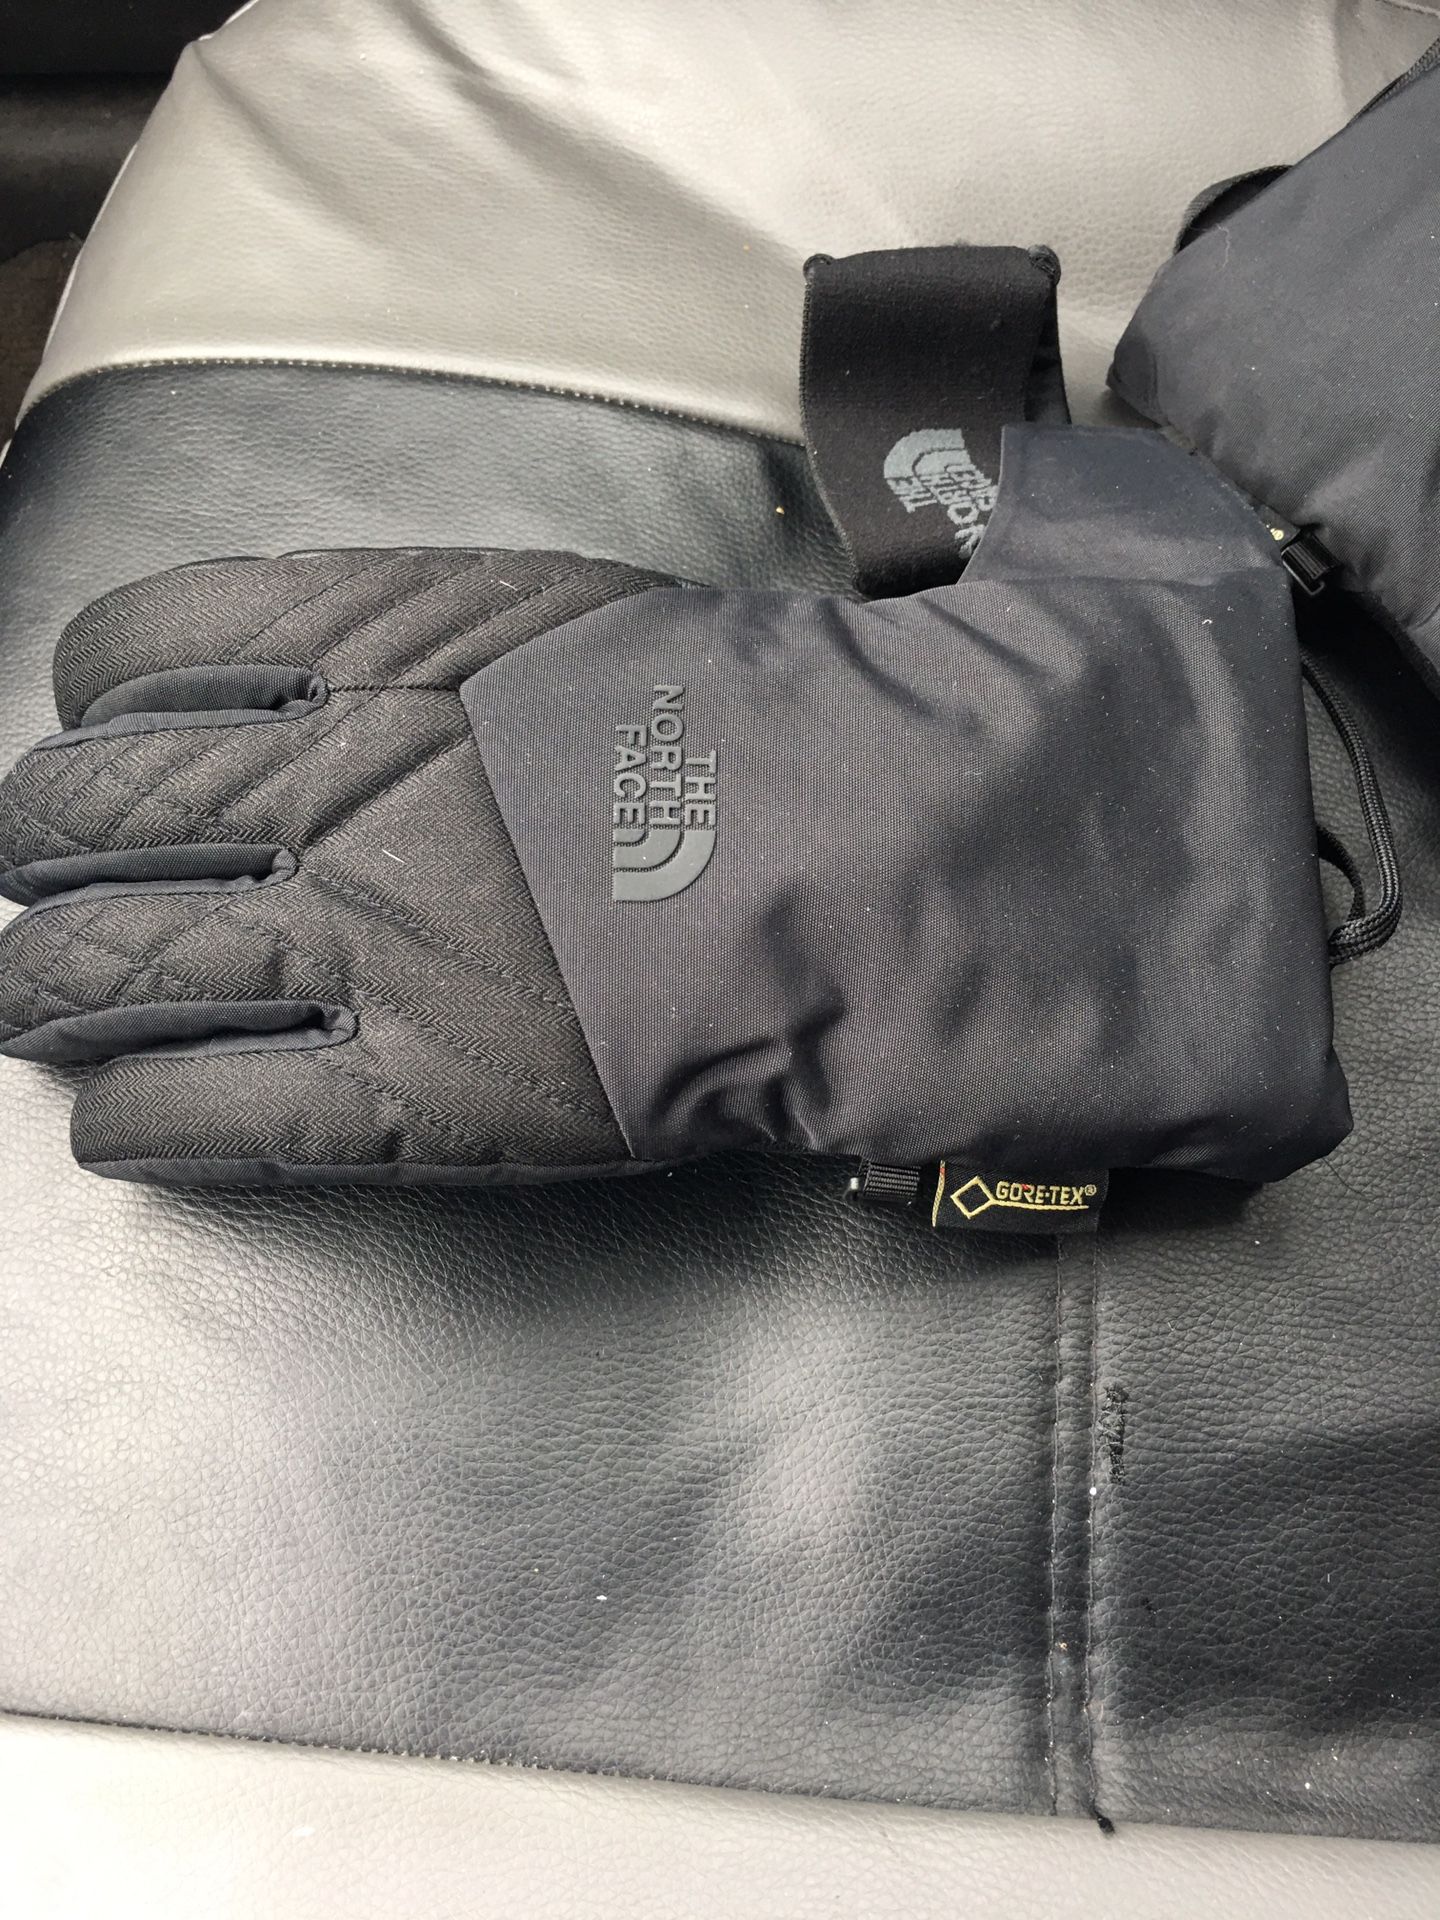 The North Face Gore-Tex winter gloves